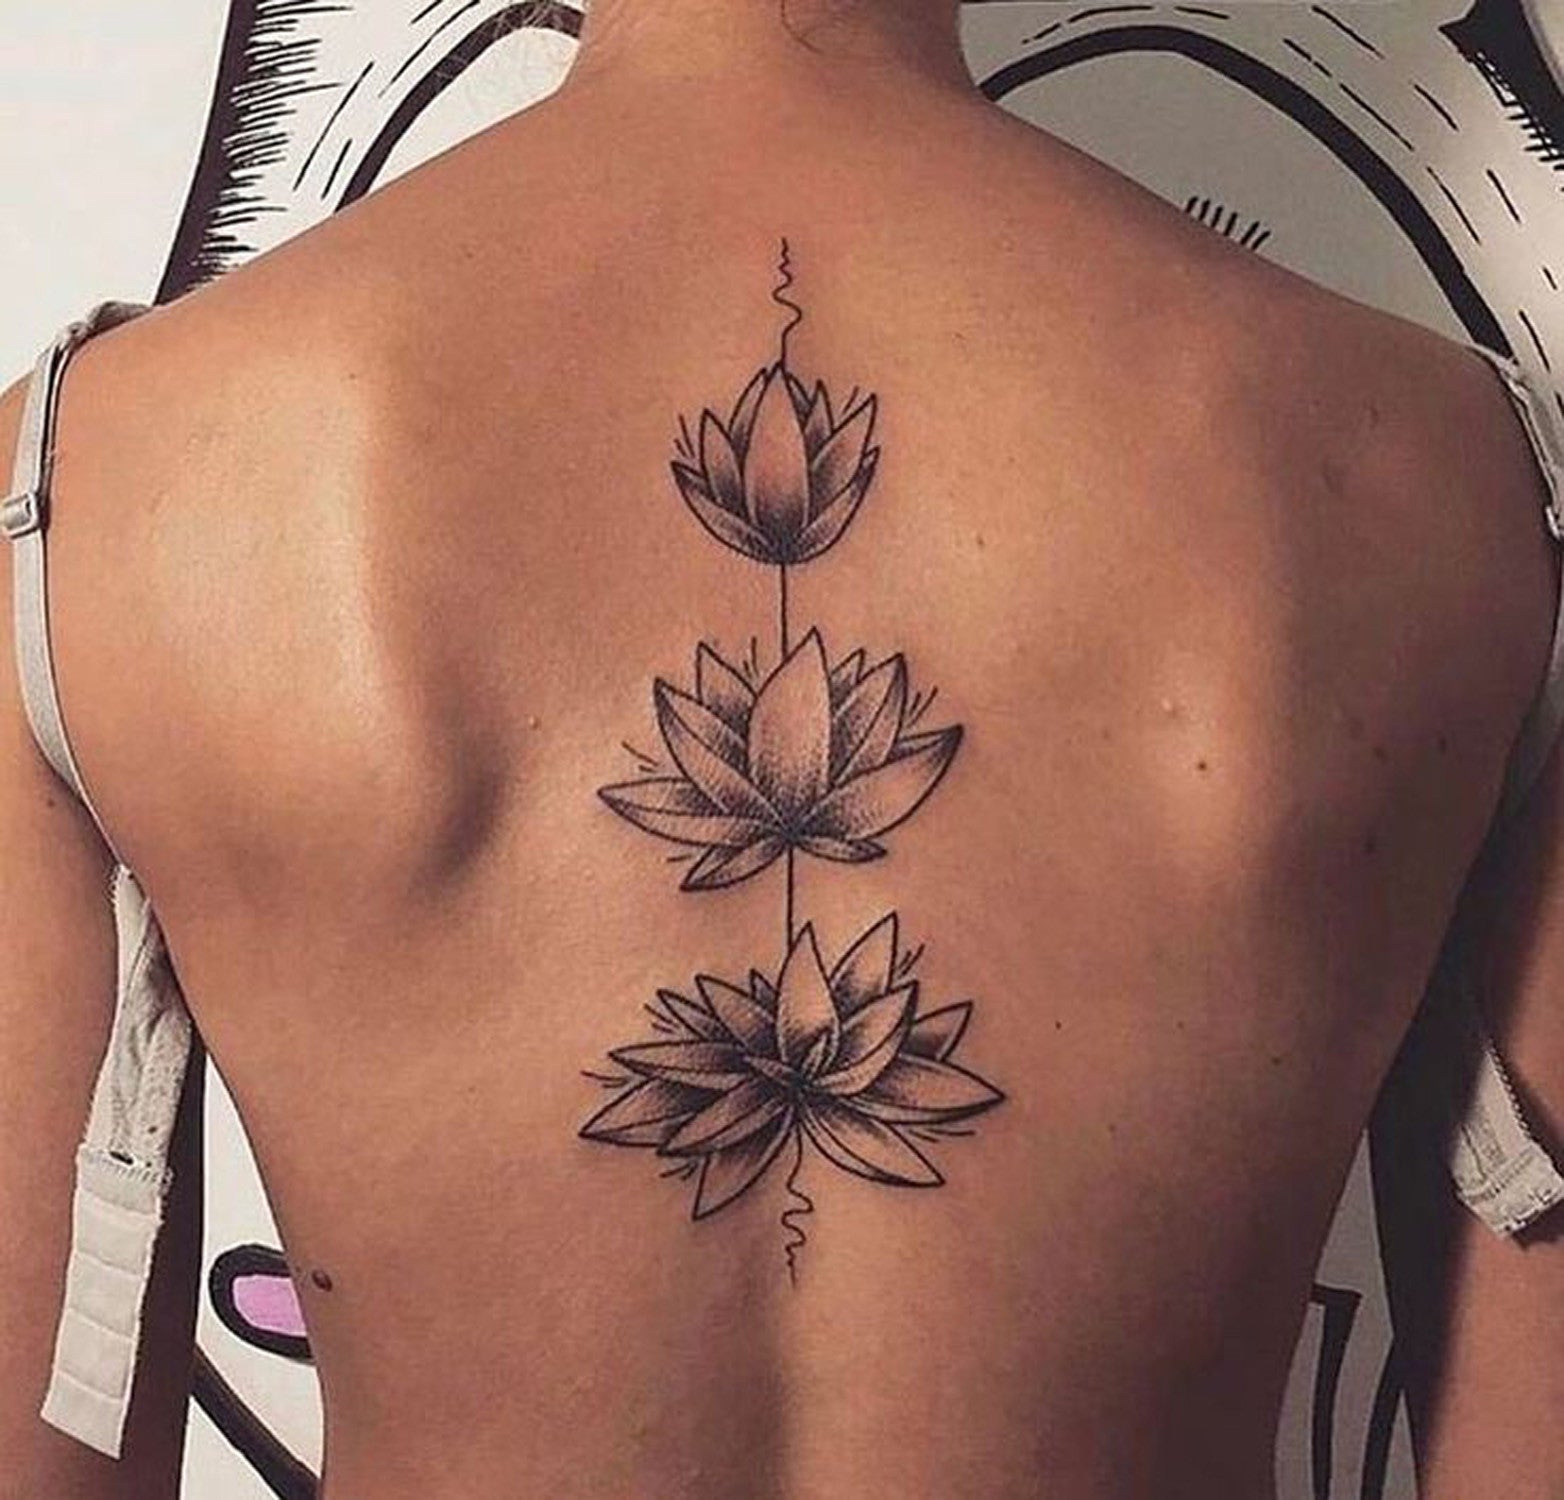 Full Triple Lotus Water Lily Flower Back Tattoo Placement Ideas for Women - Female Tat at MyBodiArt.com